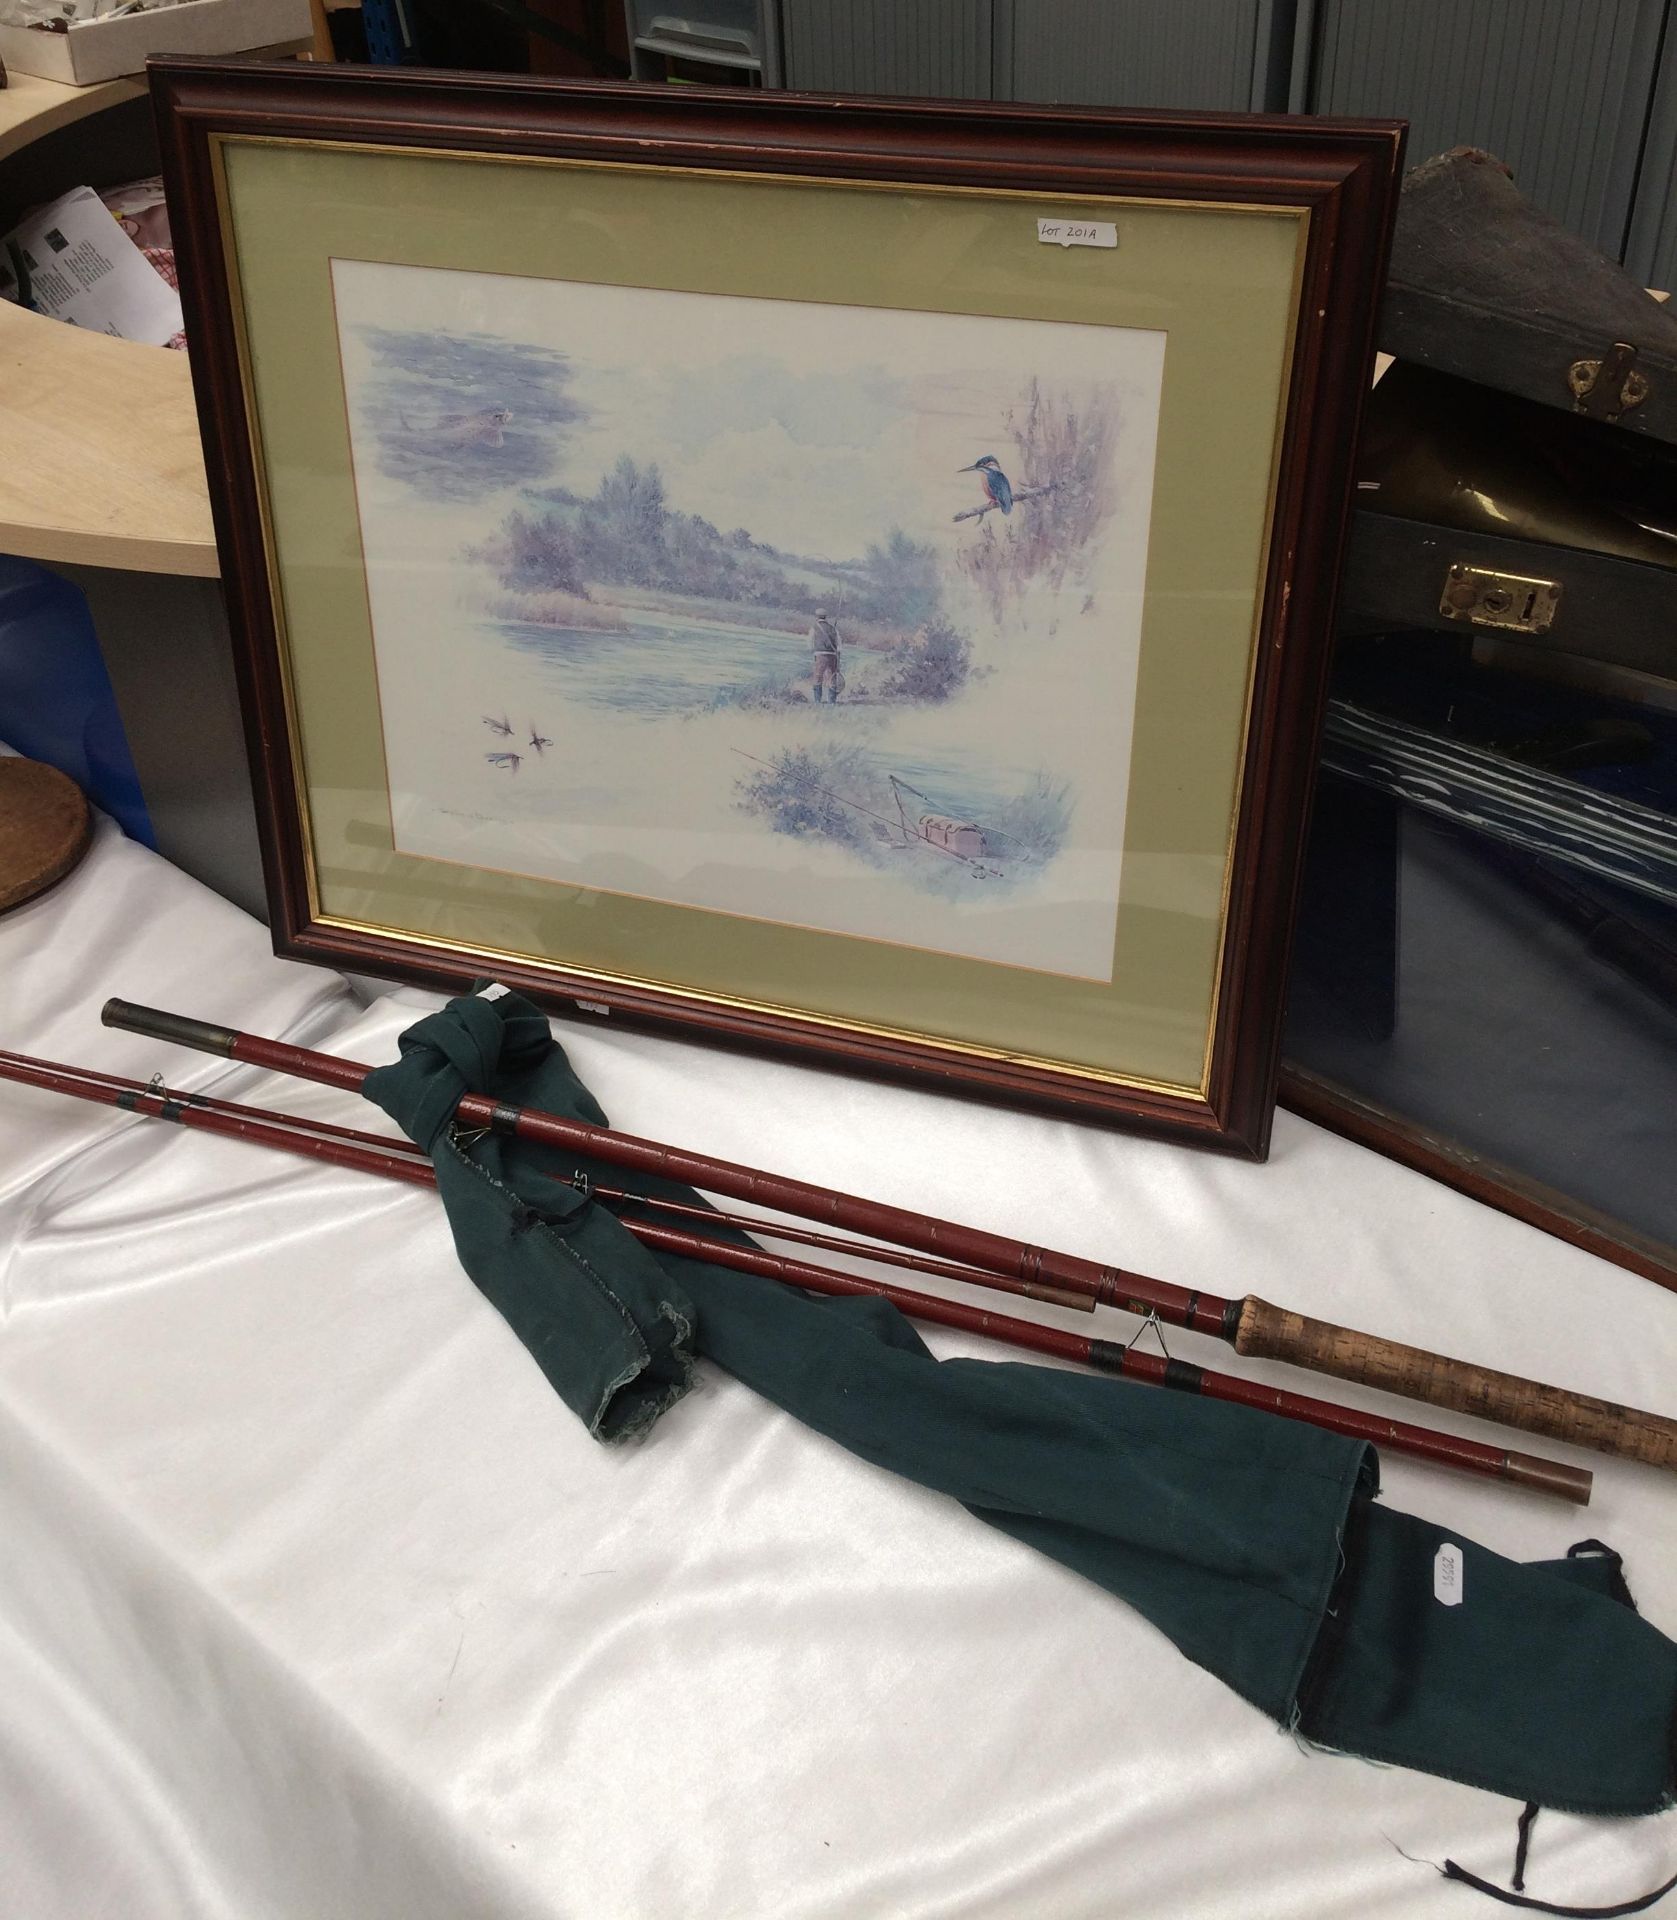 Two items - Mitre Hardy three piece fishing rod with cover and a framed print of fly fisherman by